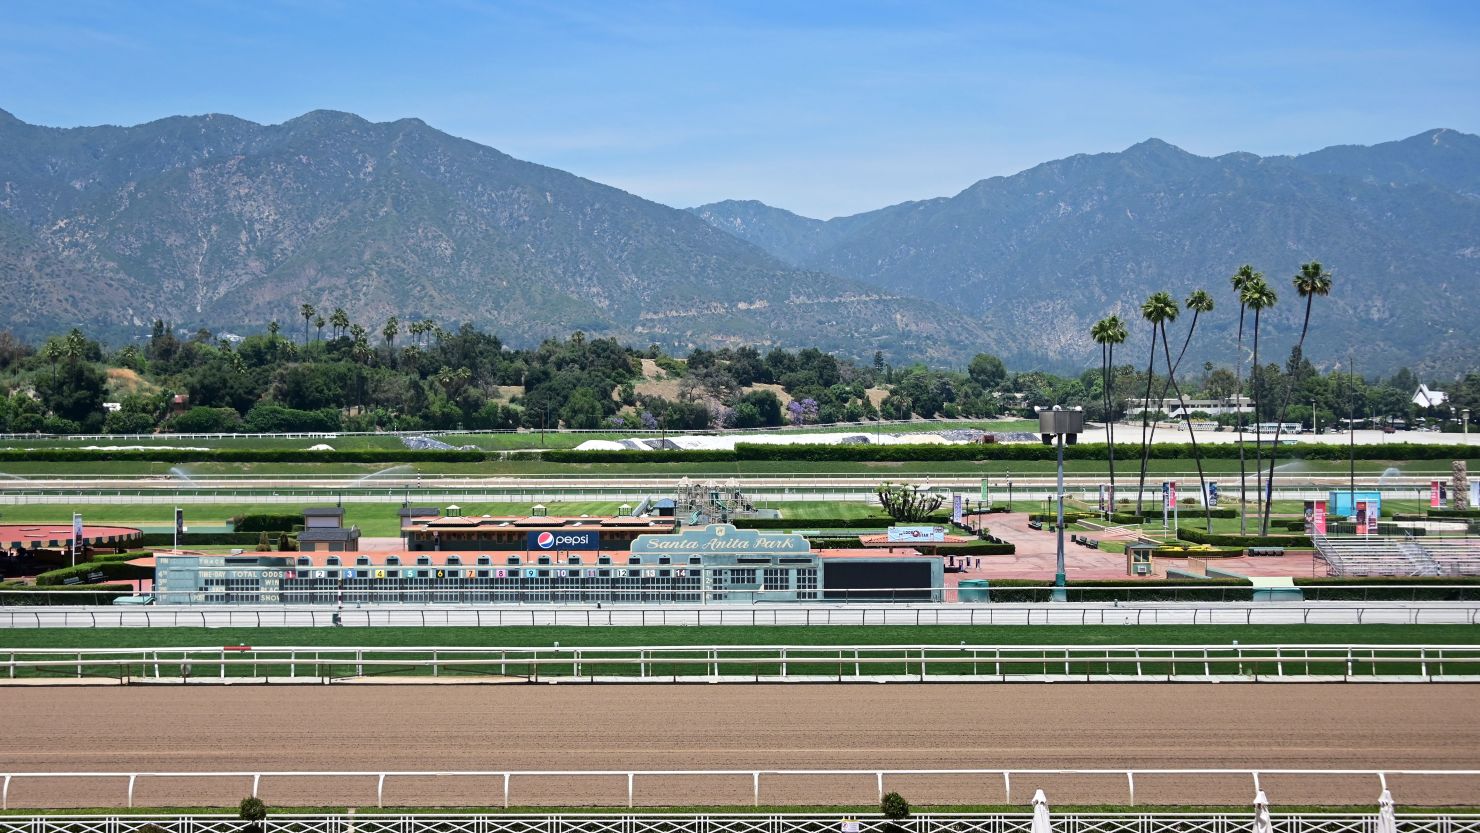 Santa Anita will host the 36th Breeders' Cup World Championships this weekend. 